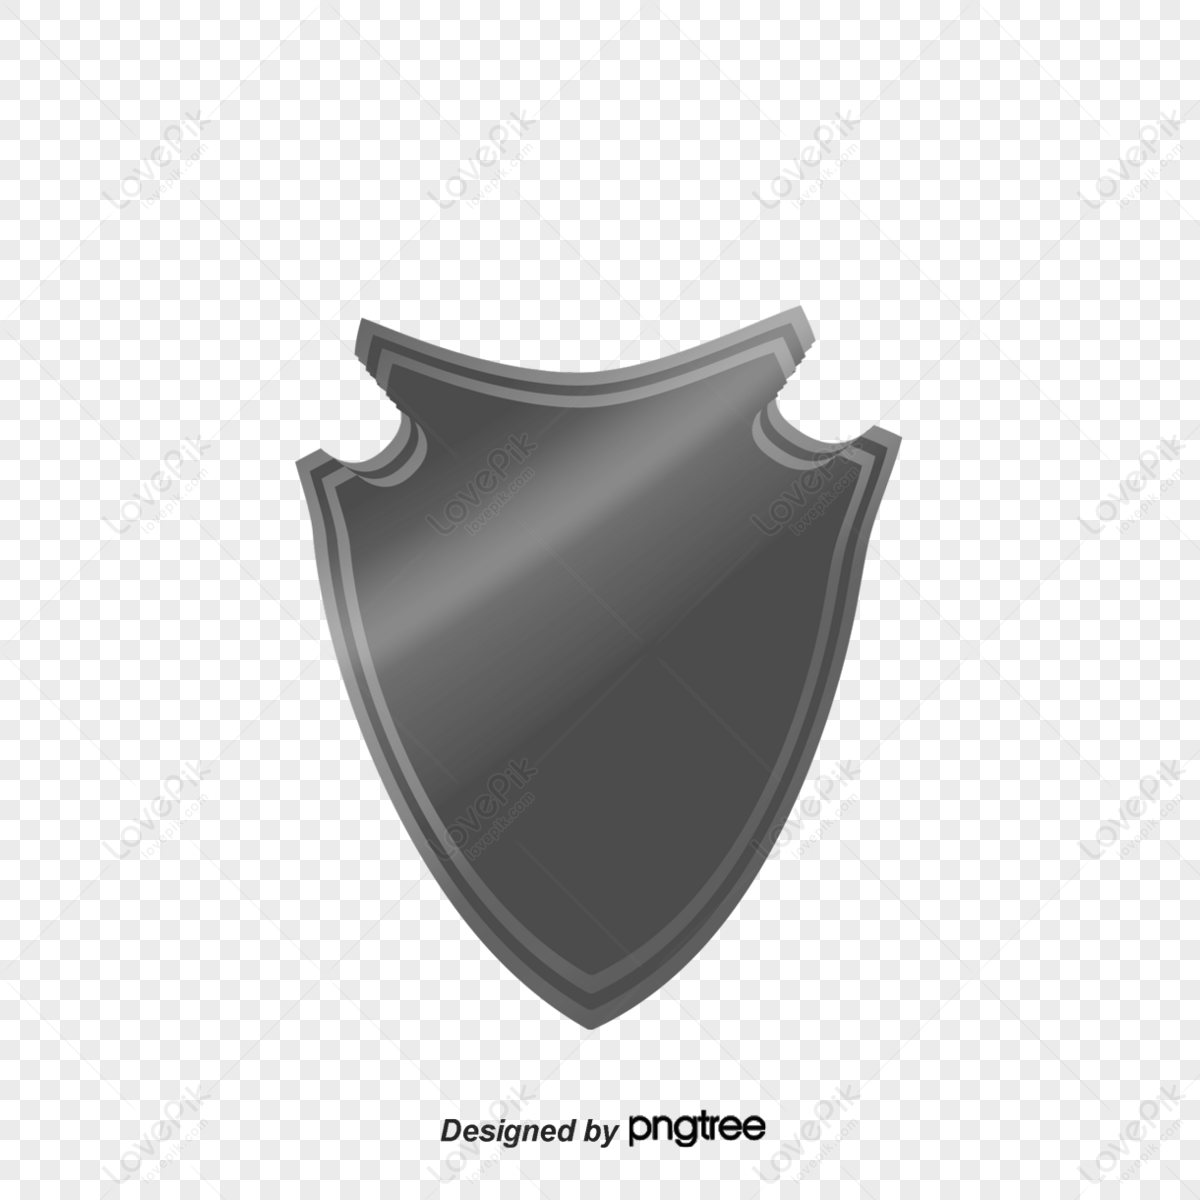 Download Logo, Geometric Shapes, Design. Royalty-Free Vector Graphic -  Pixabay